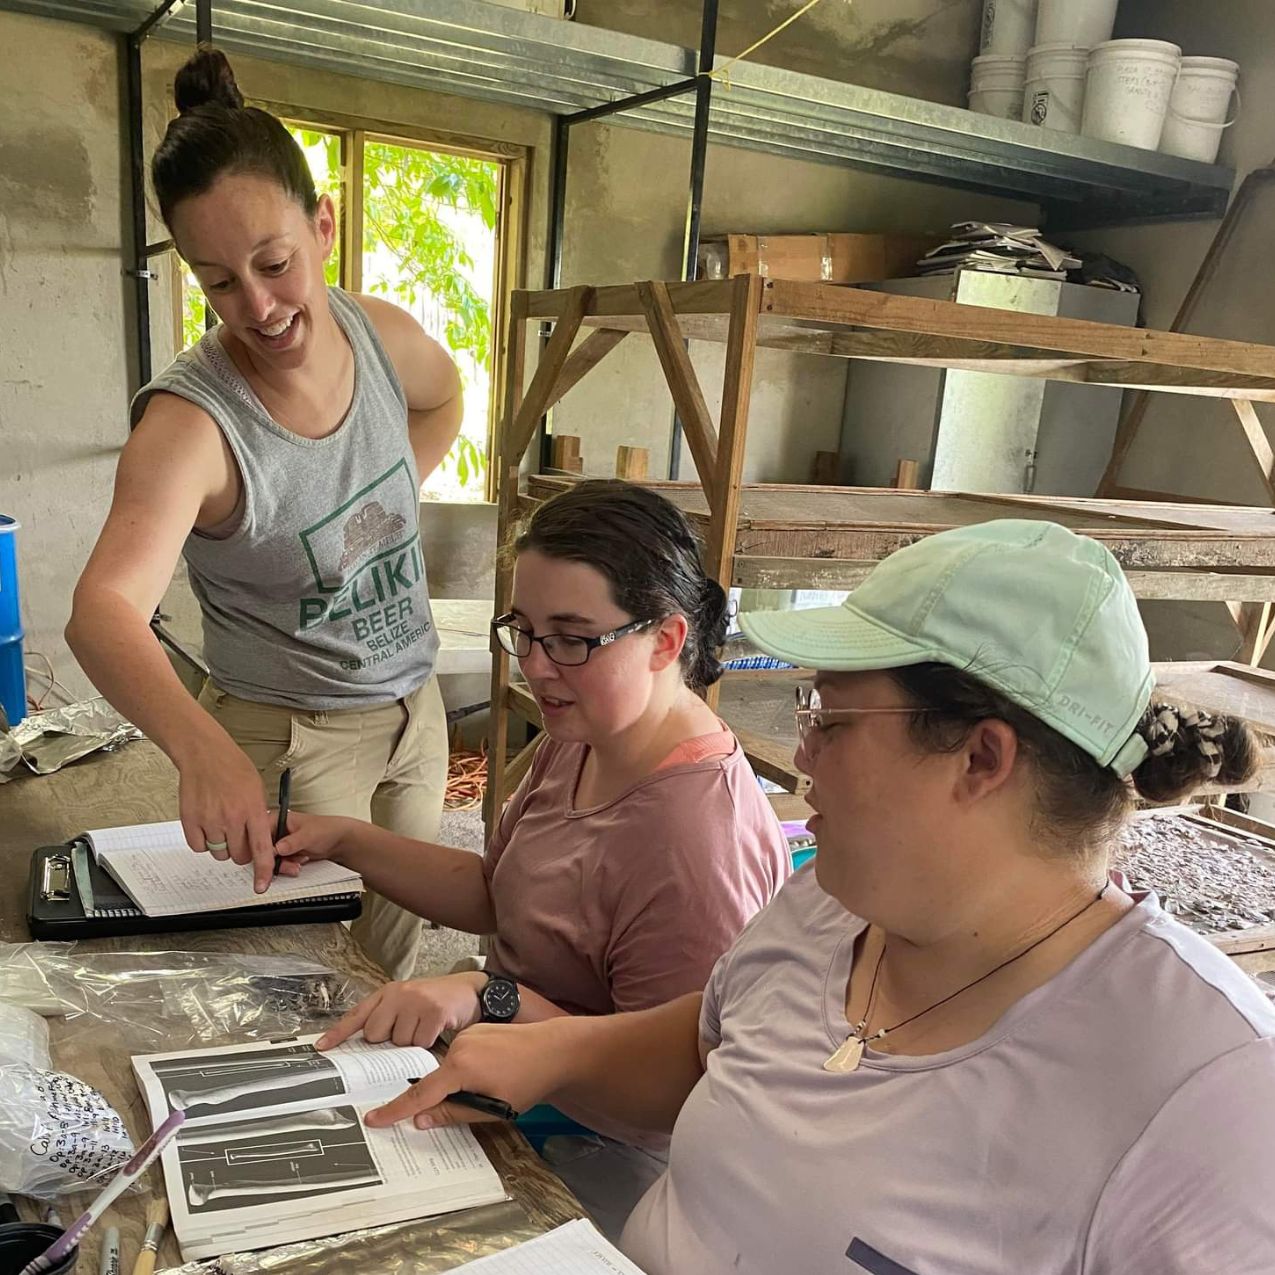 Professor Mink works with two students at a field location inside a cabin. The group is looking at texts.